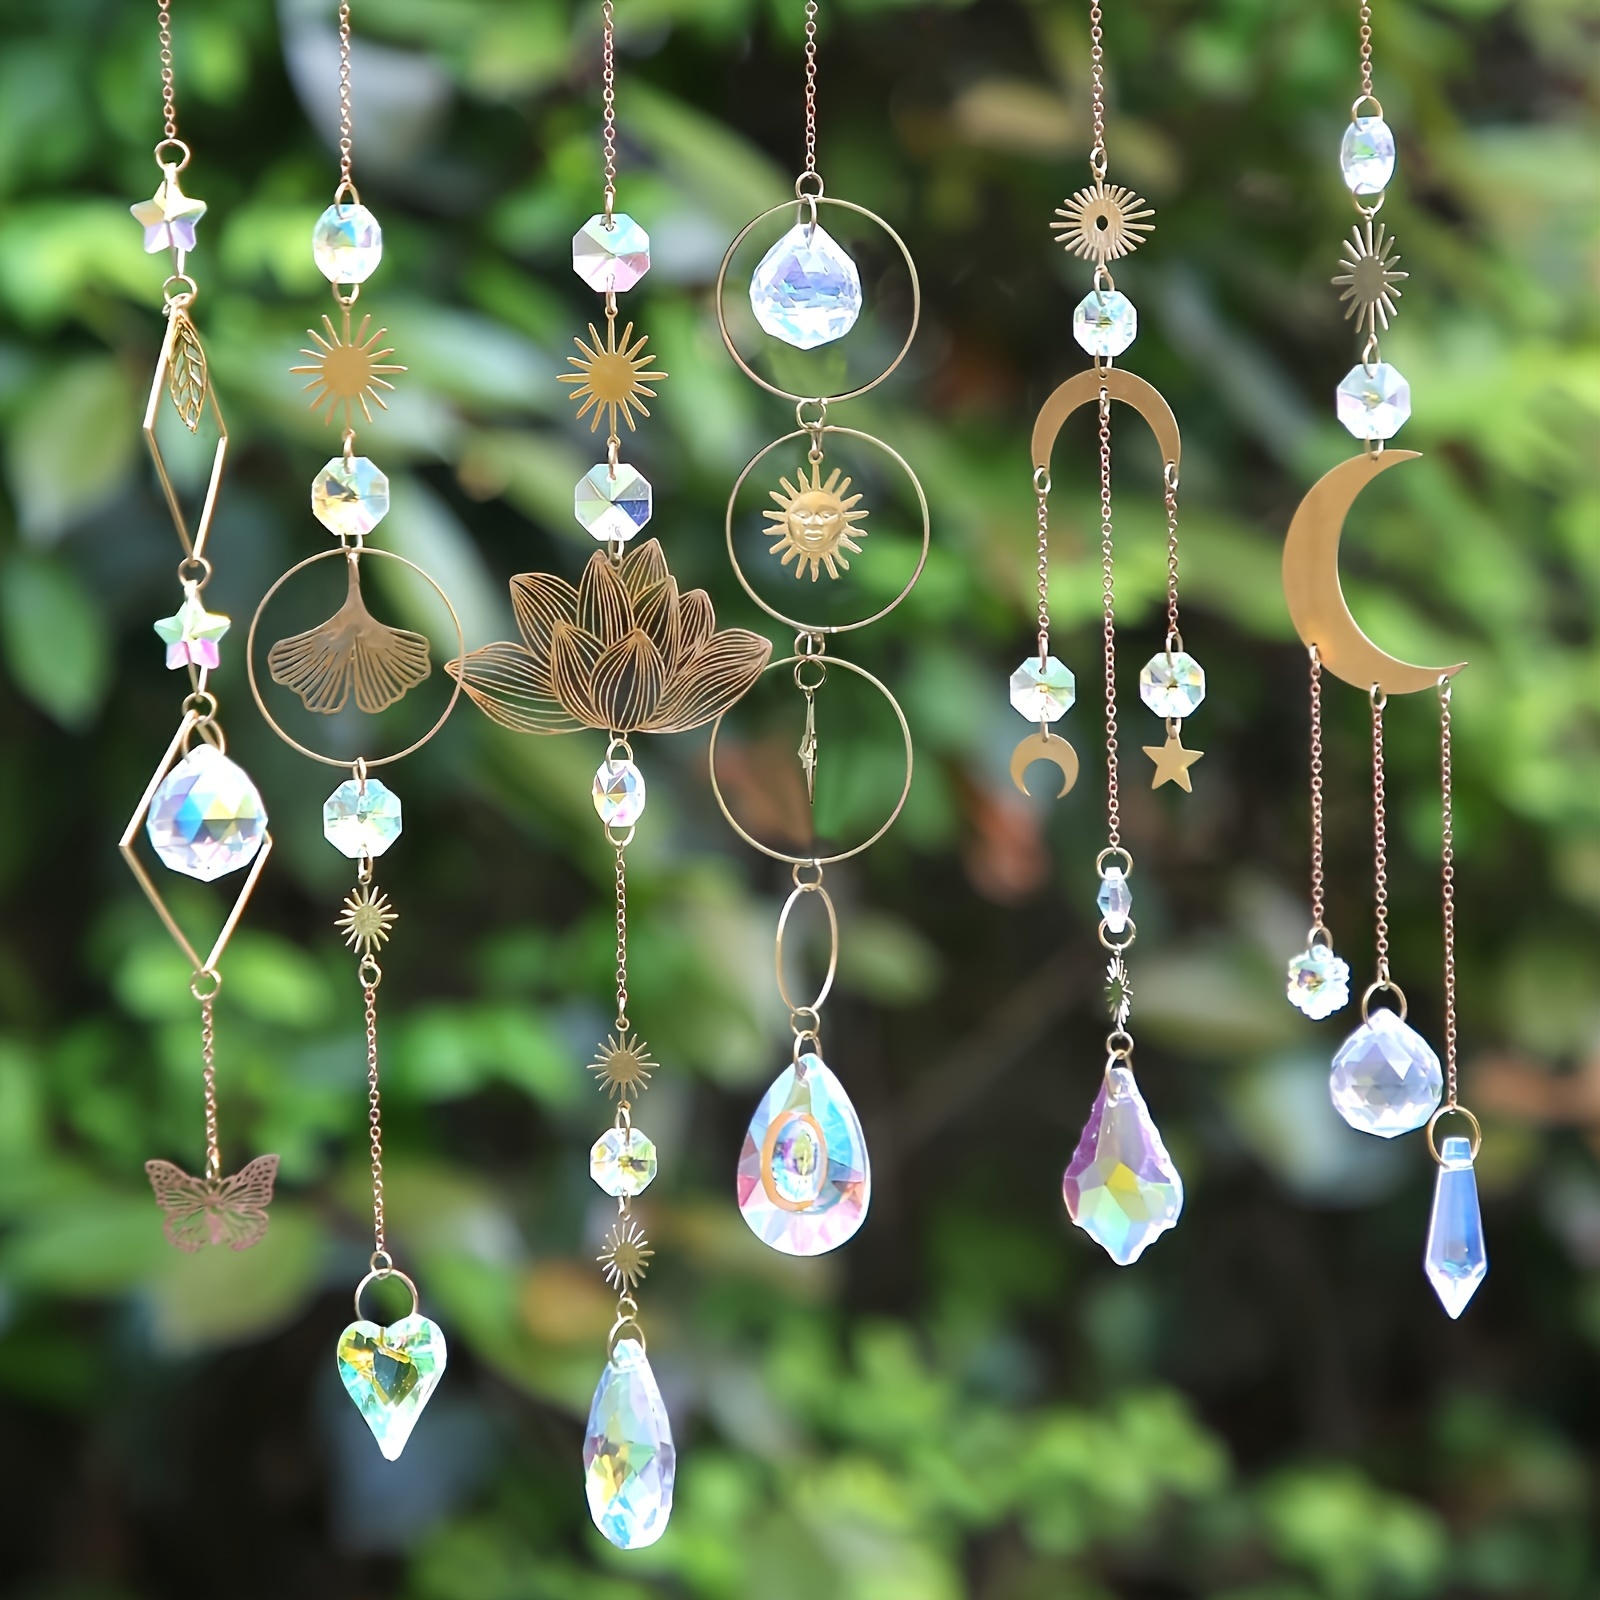 

Sun Catchers, 6 Pieces Colorful Crystal Suncatchers Decorative Hanging Clear Crystal Prism Rainbow With Silver Moon Sun Metal Forms Suncatcher Kit For Window Indoor Outdoor Car Mirror Decor Xmas Gift